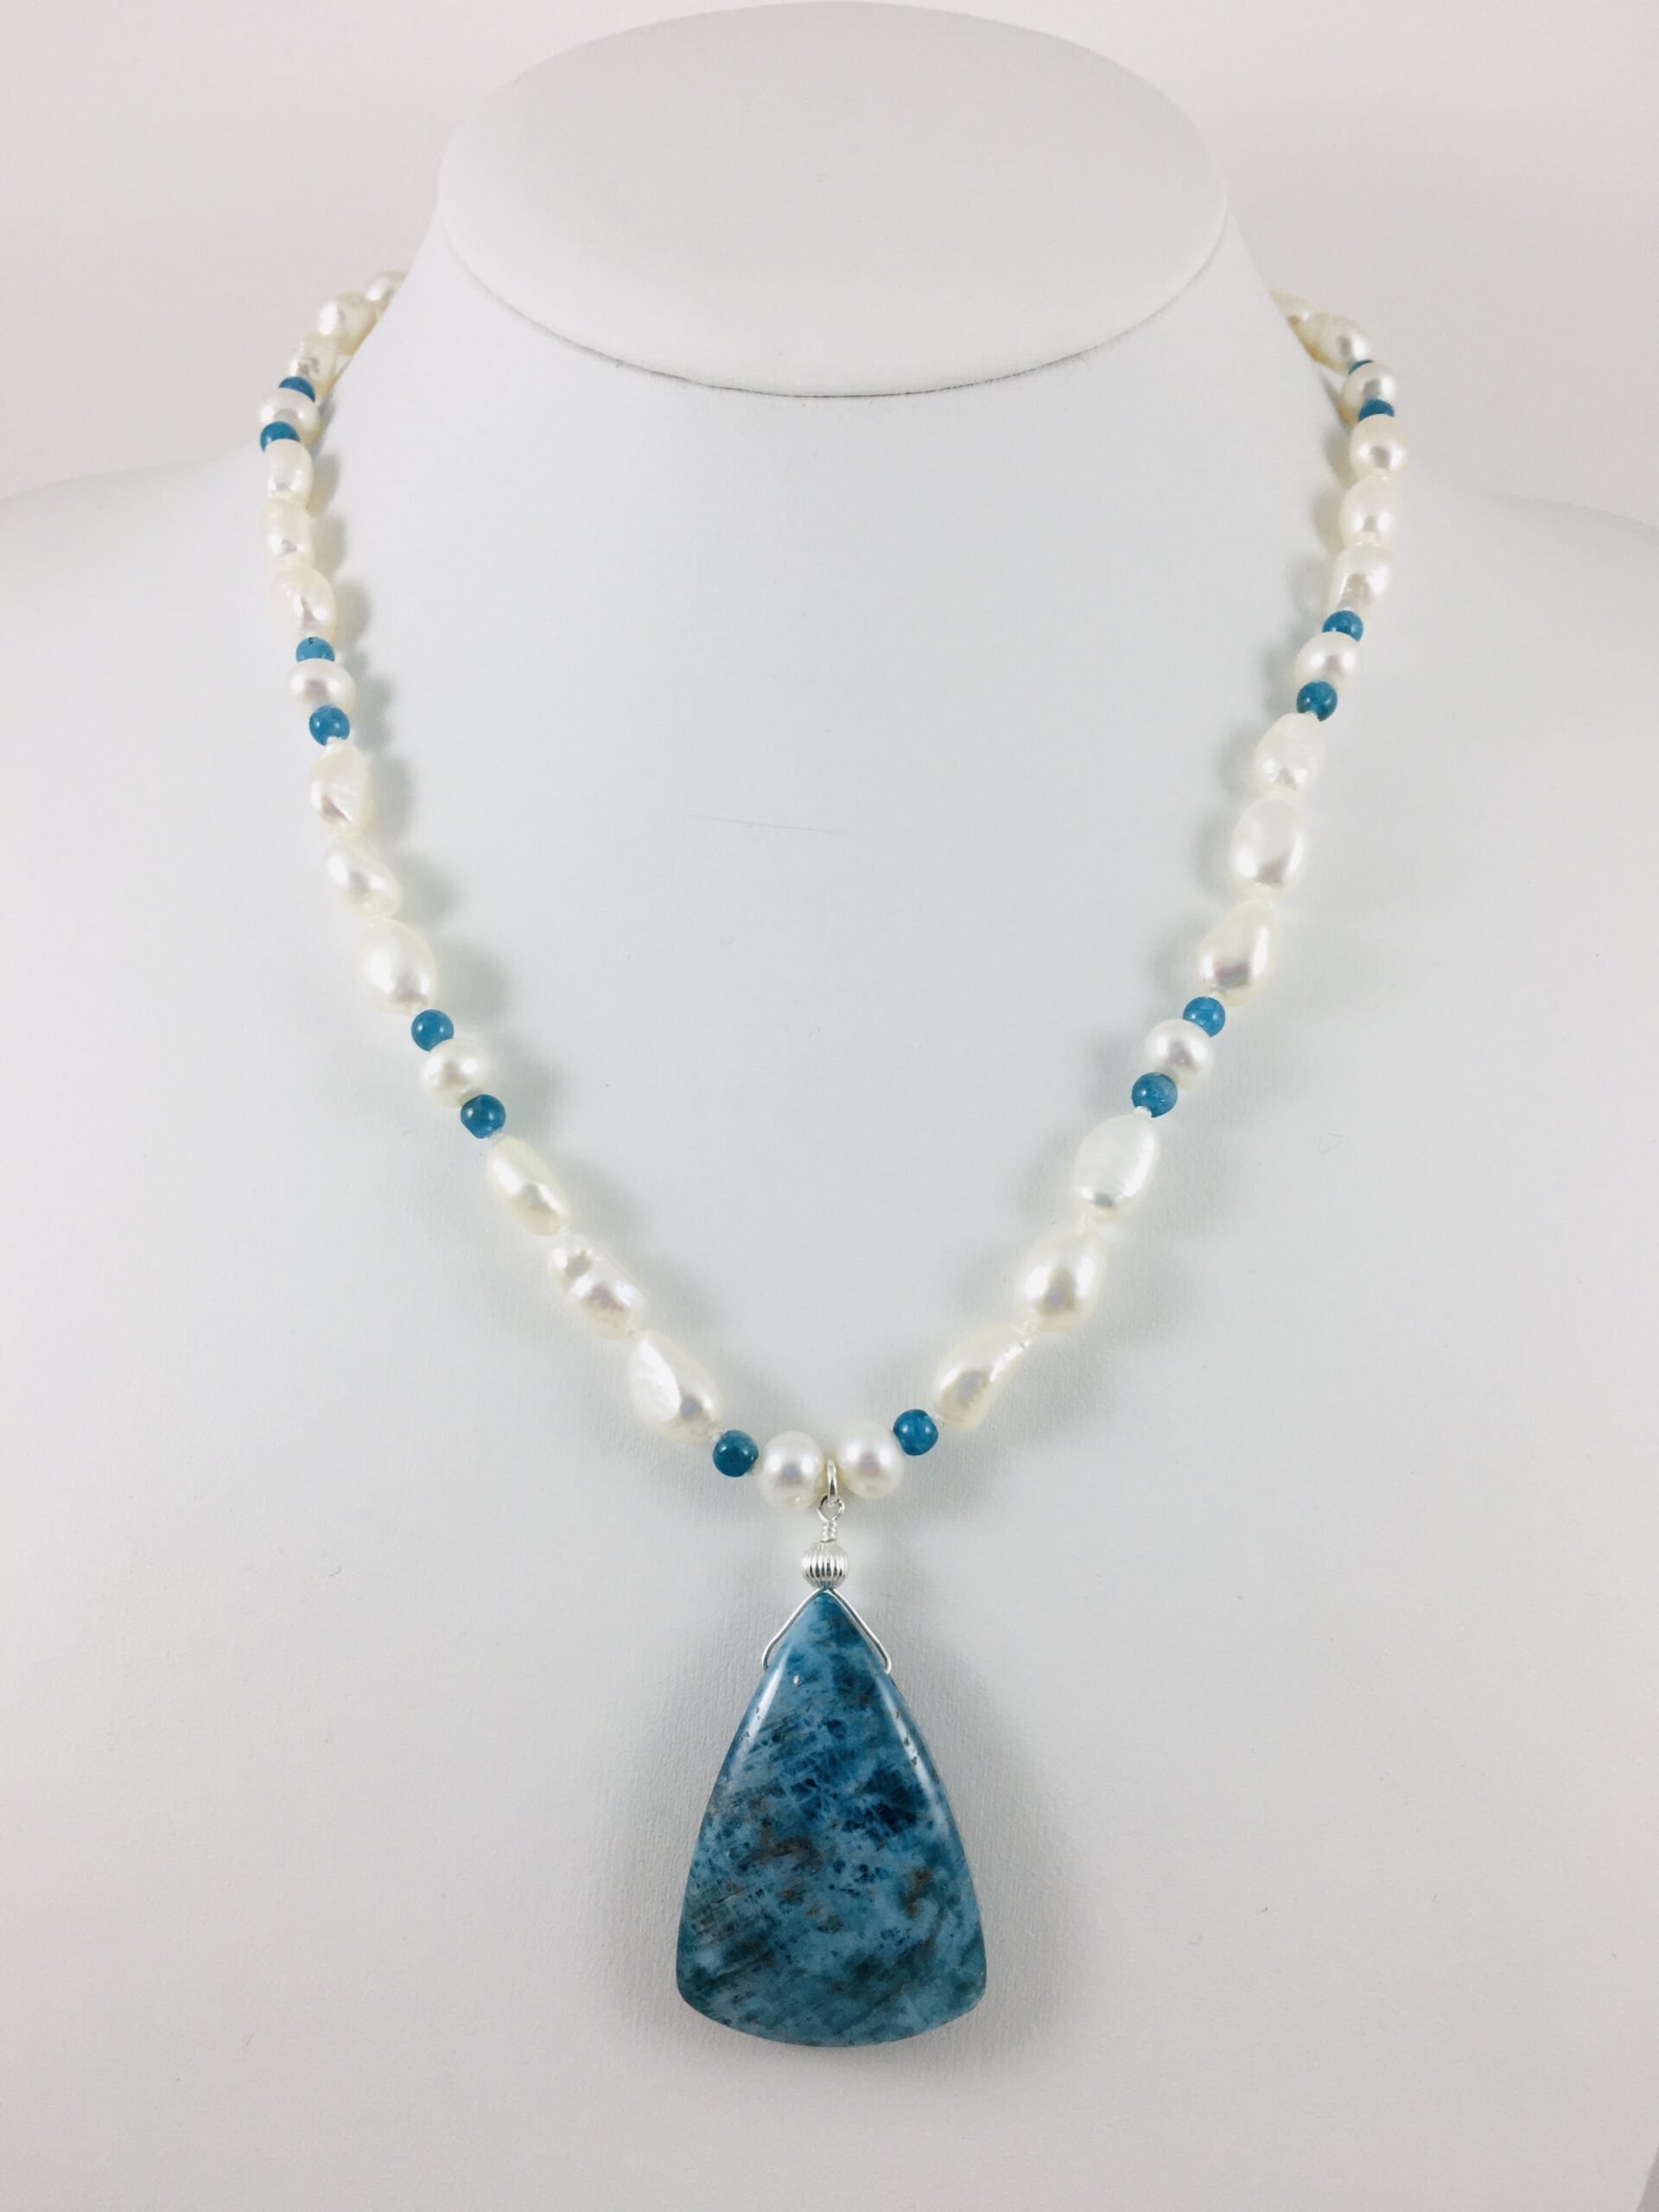 Solitary pearl necklace-apatite